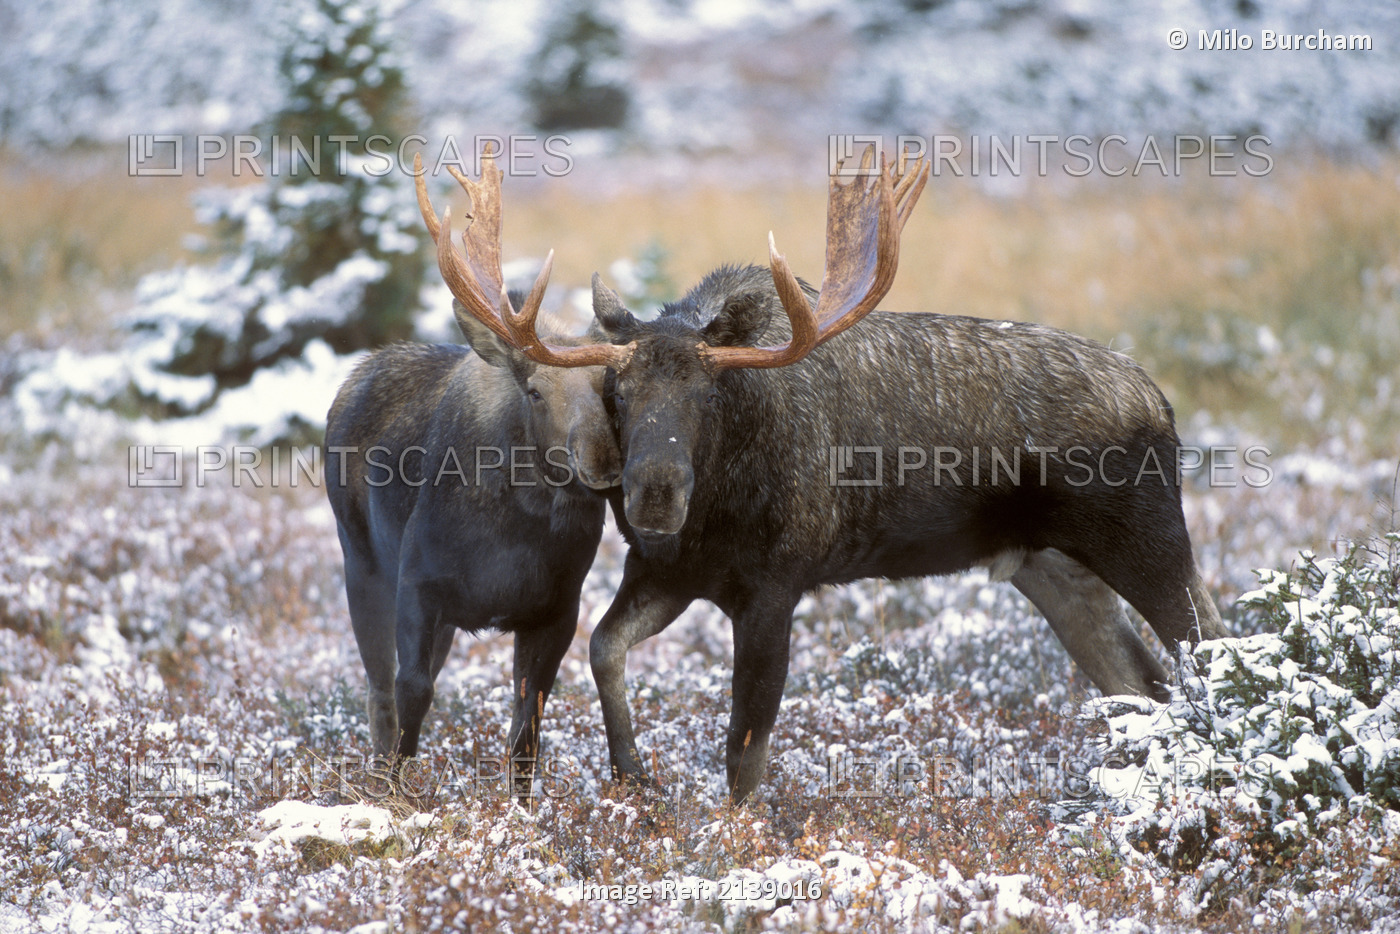 Moose Bull And Cow Rubbing Muzzles In Courtship Behavior During Rut, Powerline ...